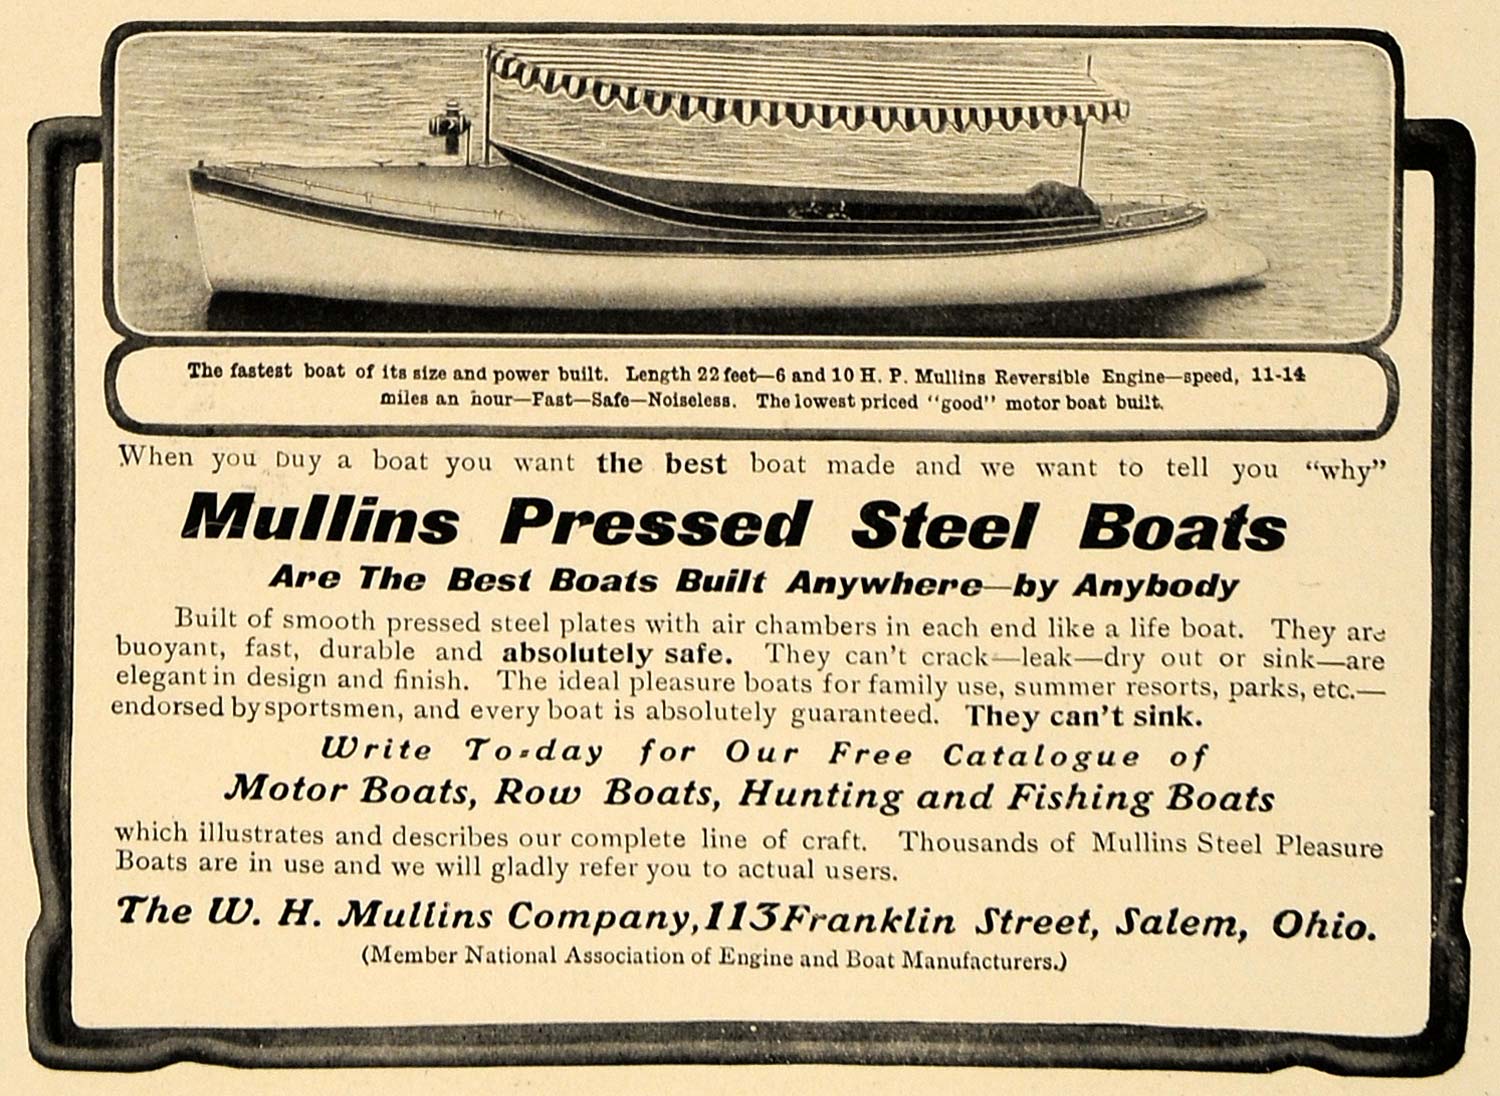 1906 Ad W H Mullins Company Pressed Steel Motor Boats - ORIGINAL ADVERTISING CL8